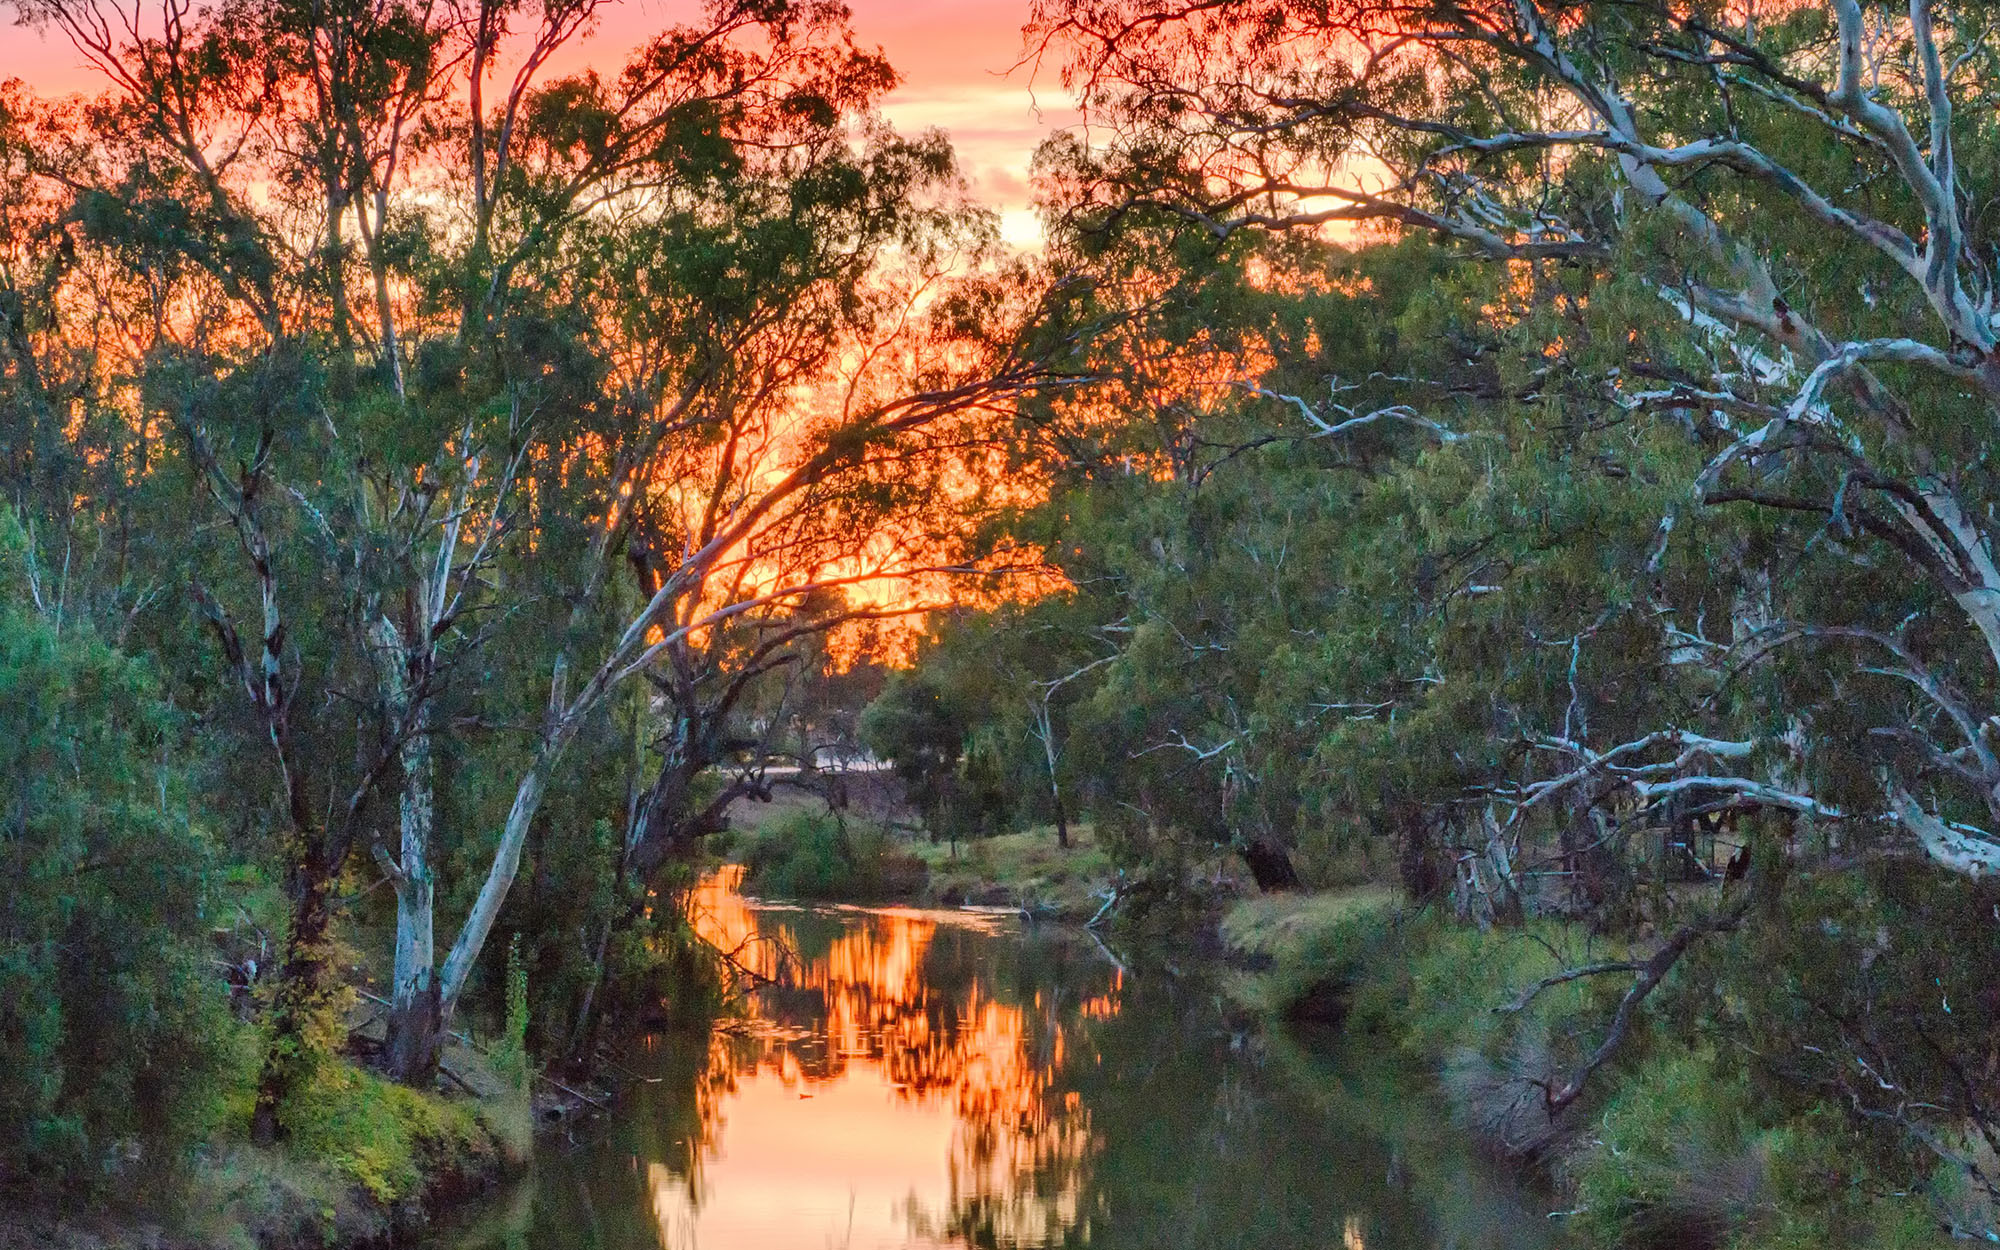 Lachlan River at Condobolin in New South Wales.